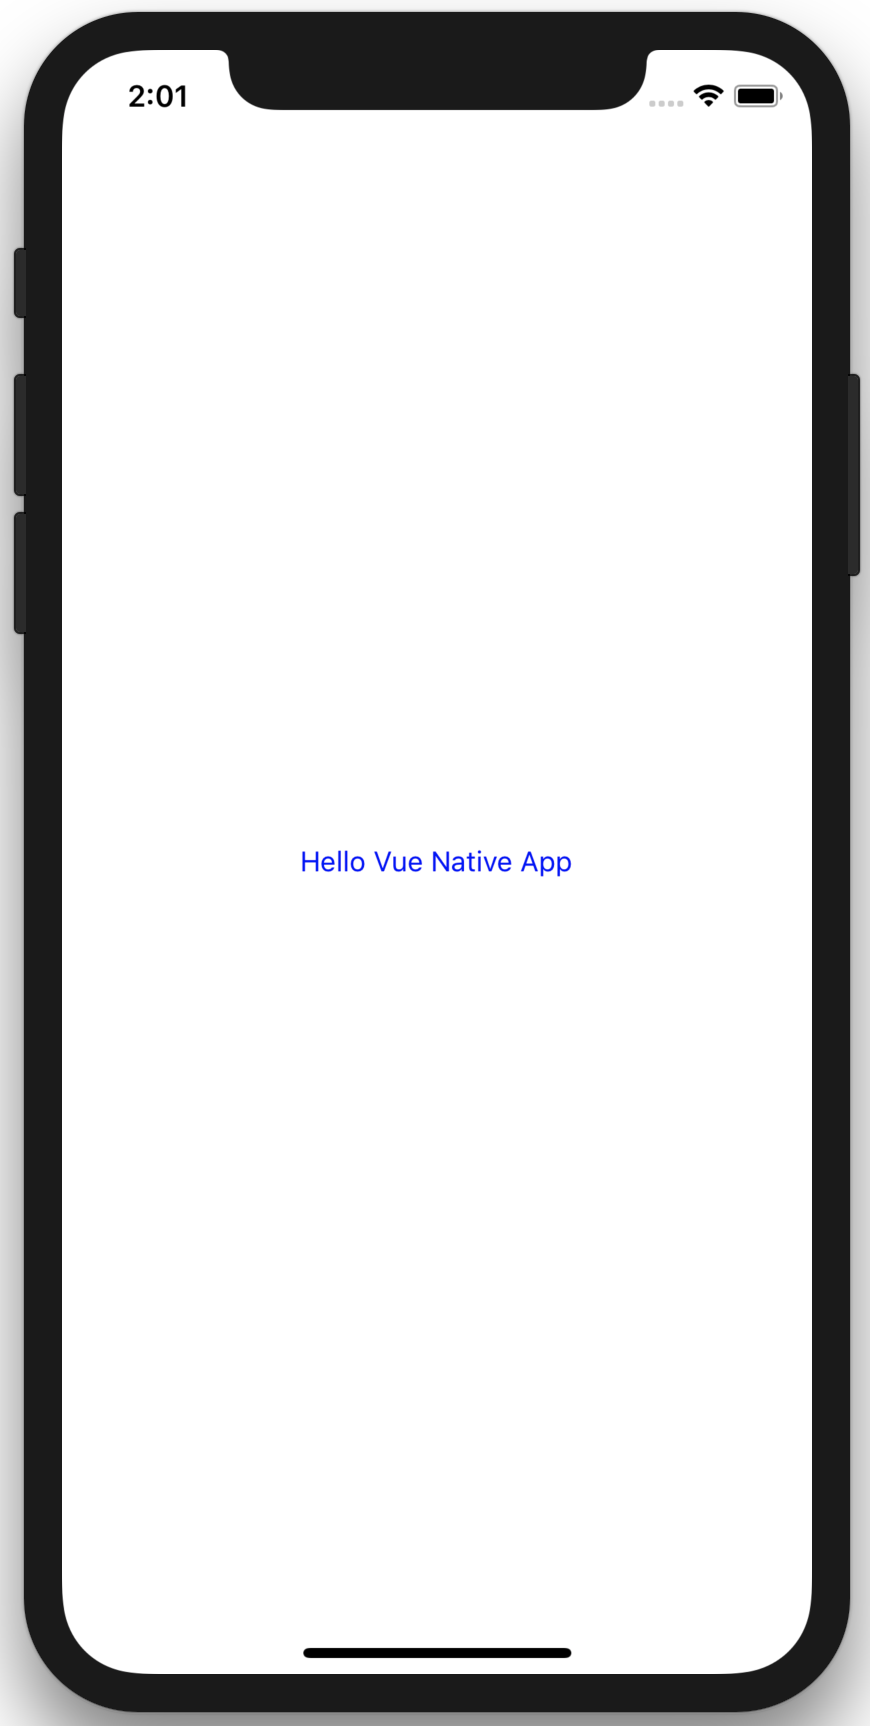 iPhone X - 11.4 2018-06-13 14-01-33.png